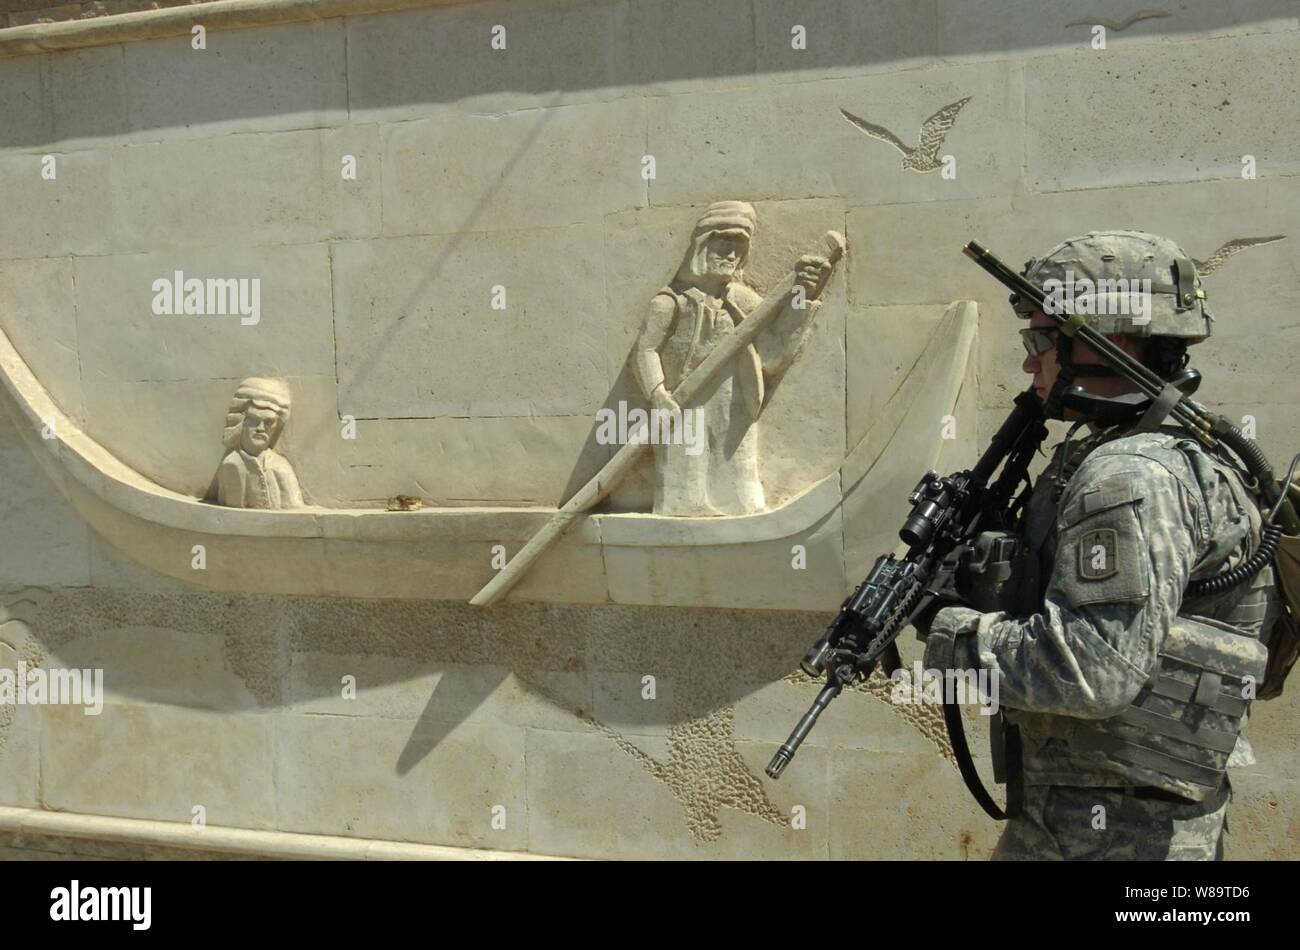 U.S. Army Spc. Anthony D. Johnston patrols by a caved marble wall as his company conducts a reconnaissance mission in Sadr City, Iraq, on Sept. 8, 2006.  Johnston is assigned to Charlie Company, 1st Battalion, 17th Infantry Regiment, 172nd Stryker Brigade Combat Team. Stock Photo